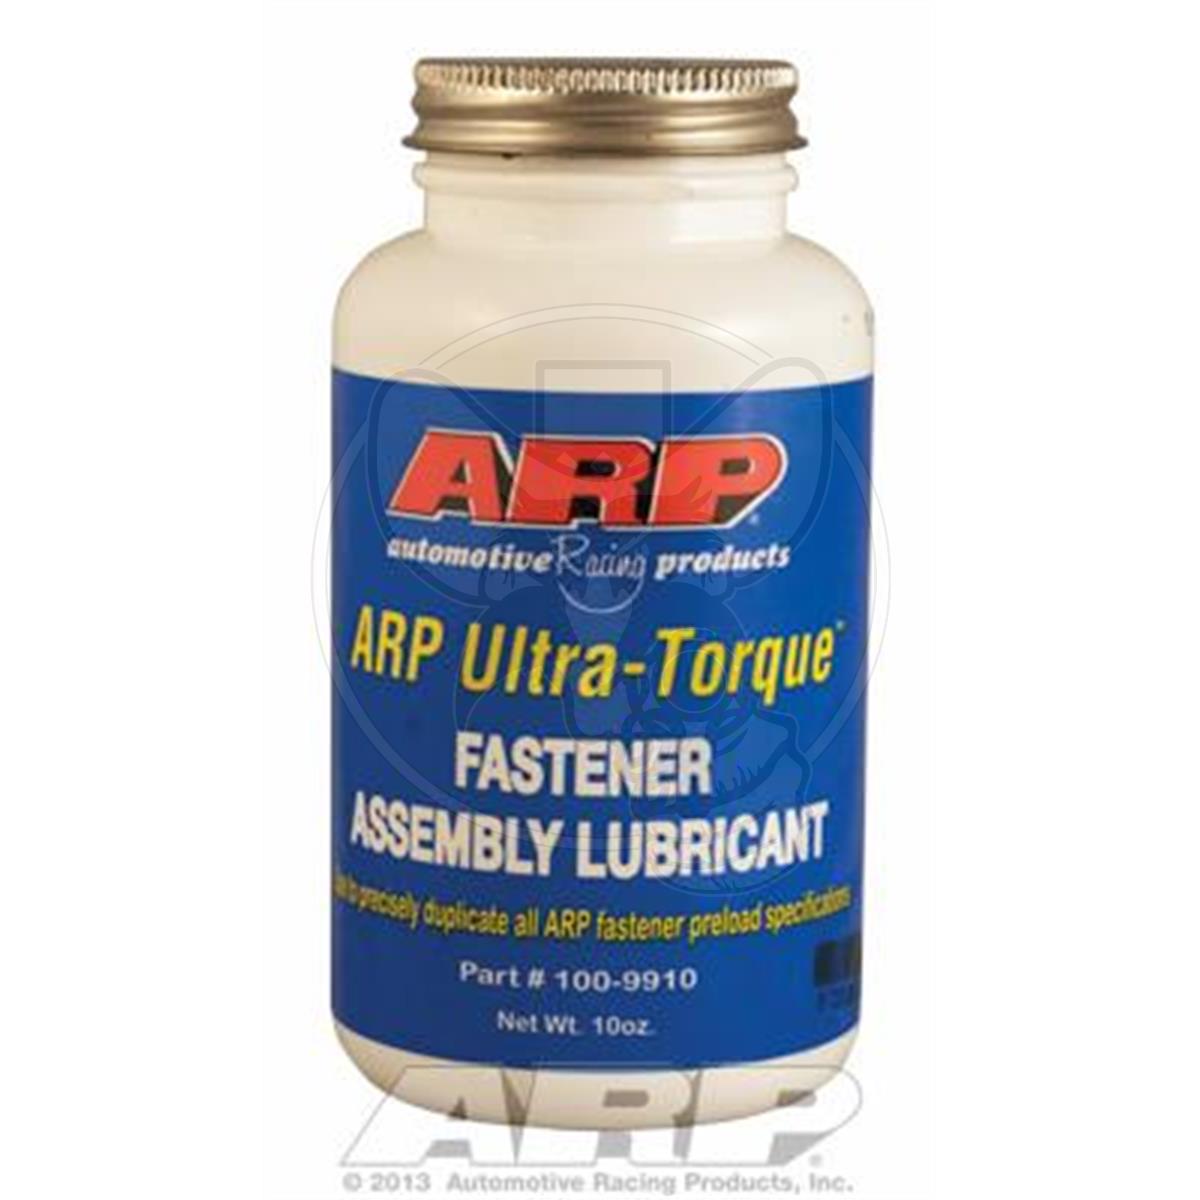 ARP FASTENER ASSEMBLY LUBRICANT FOR STUDS & NUTS 10 OUNCE